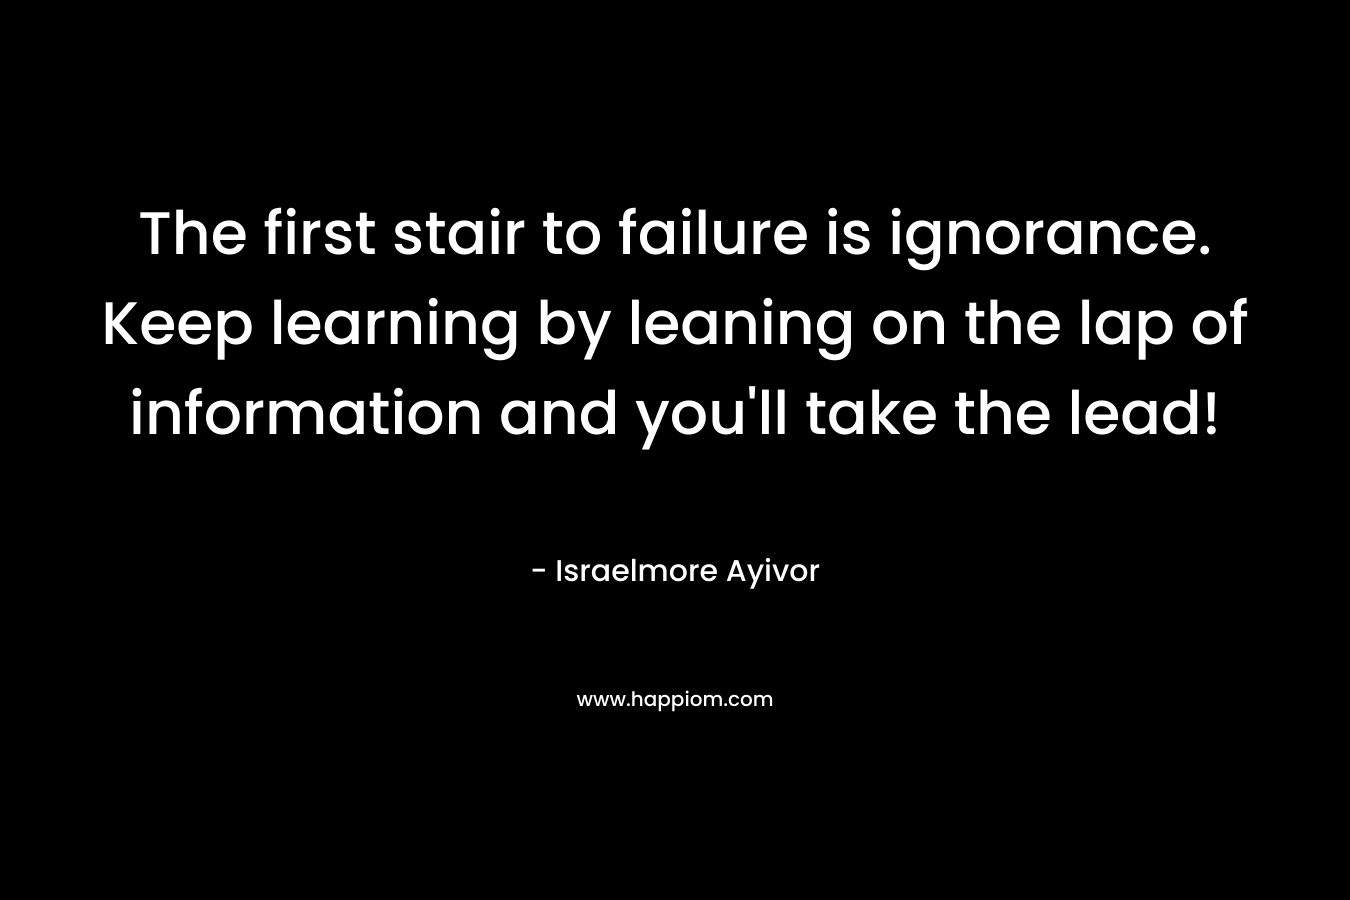 The first stair to failure is ignorance. Keep learning by leaning on the lap of information and you’ll take the lead! – Israelmore Ayivor